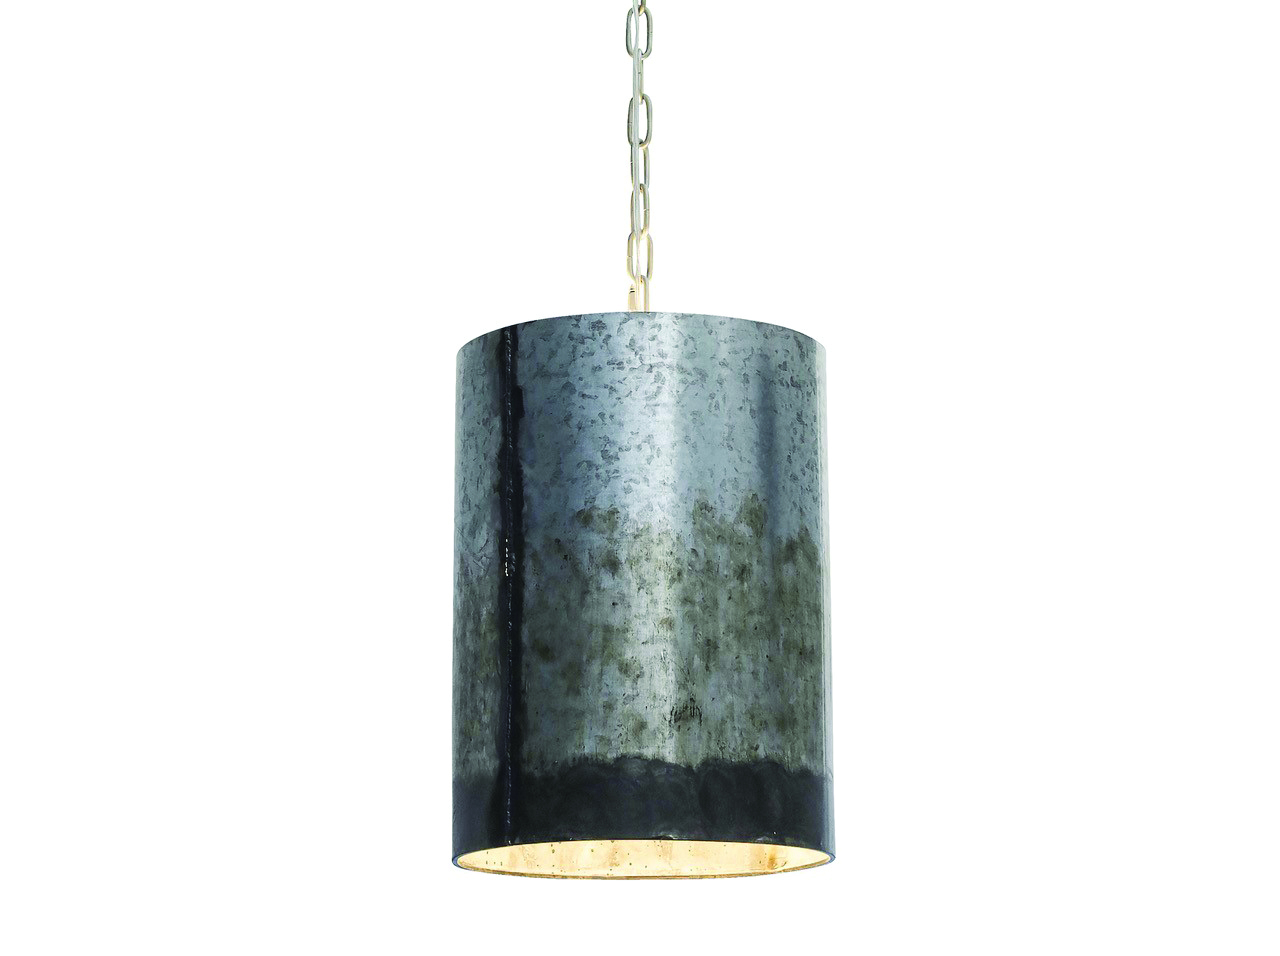 Cannery :: VaraluzWhat’s noteworthy: Modern Farmhouse seems to be everywhere, but this hand-forged and hand-stained version gives the ubiquitous style an edgy twist. The Cannery pendant in a hand-applied Ombre finish is inspired by the notion of Napa Valley meets Little House on the Prairie, according to the company. The hand-forged galvanized steel in a hand-applied finish reinforces the craftsmanship vibe.  www.varaluz.com